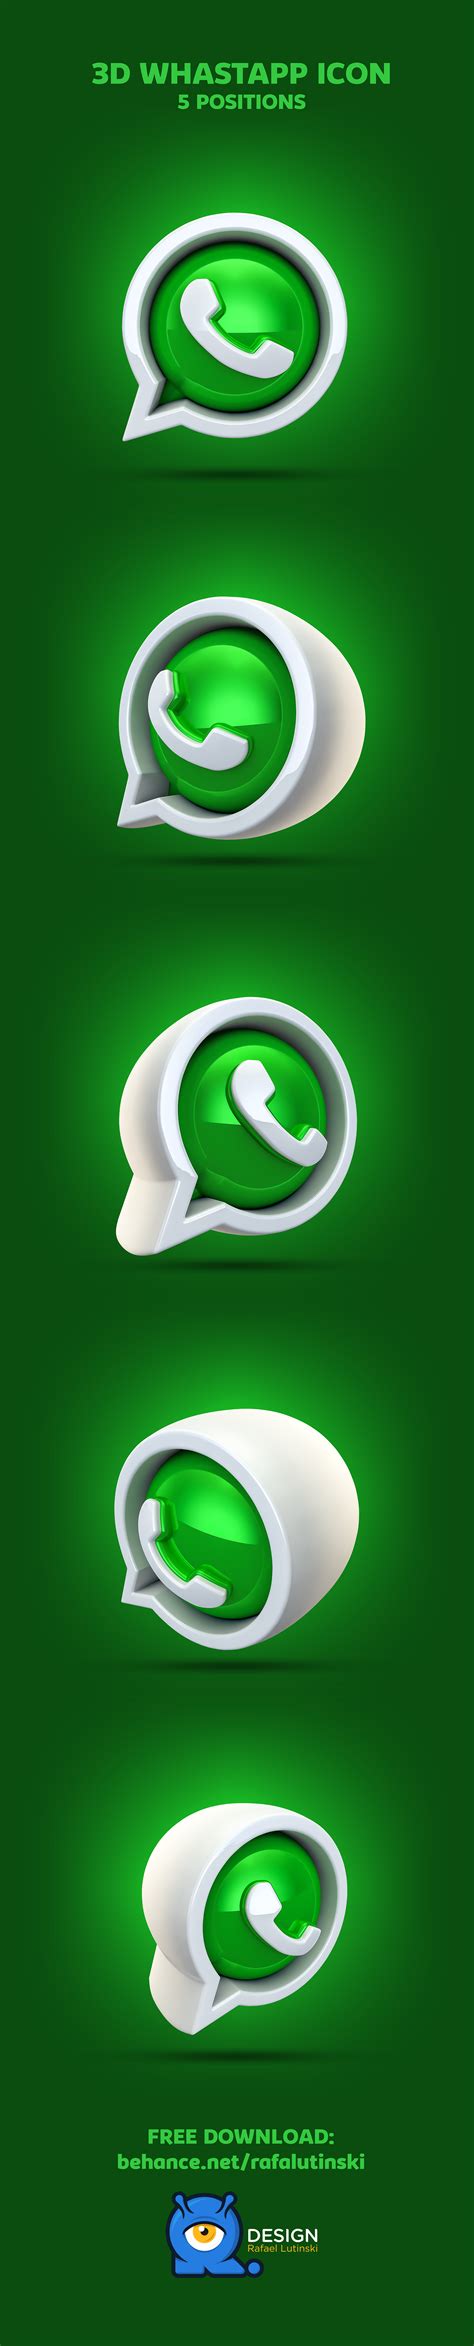 Flaticon, the largest database of free vector icons. 3D WhatsApp Icon - FREE DOWNLOAD on Behance